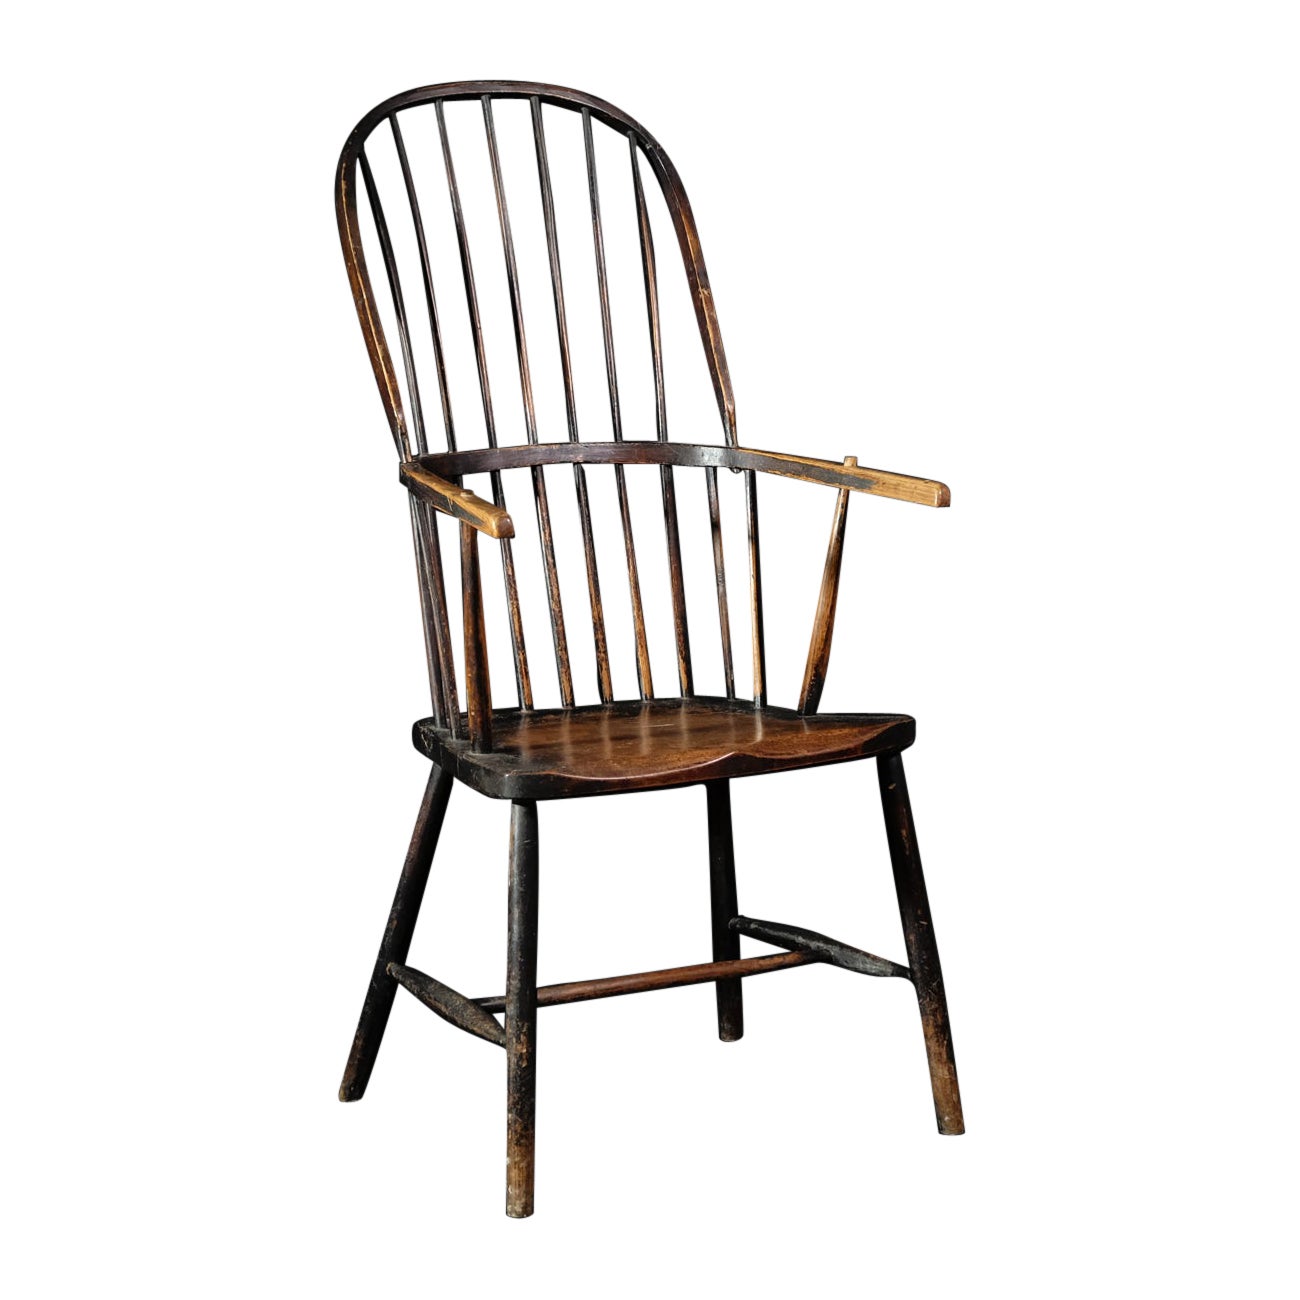 Early 19th Century Cornish English West Country Windsor Stick Chair, Farmhouse For Sale